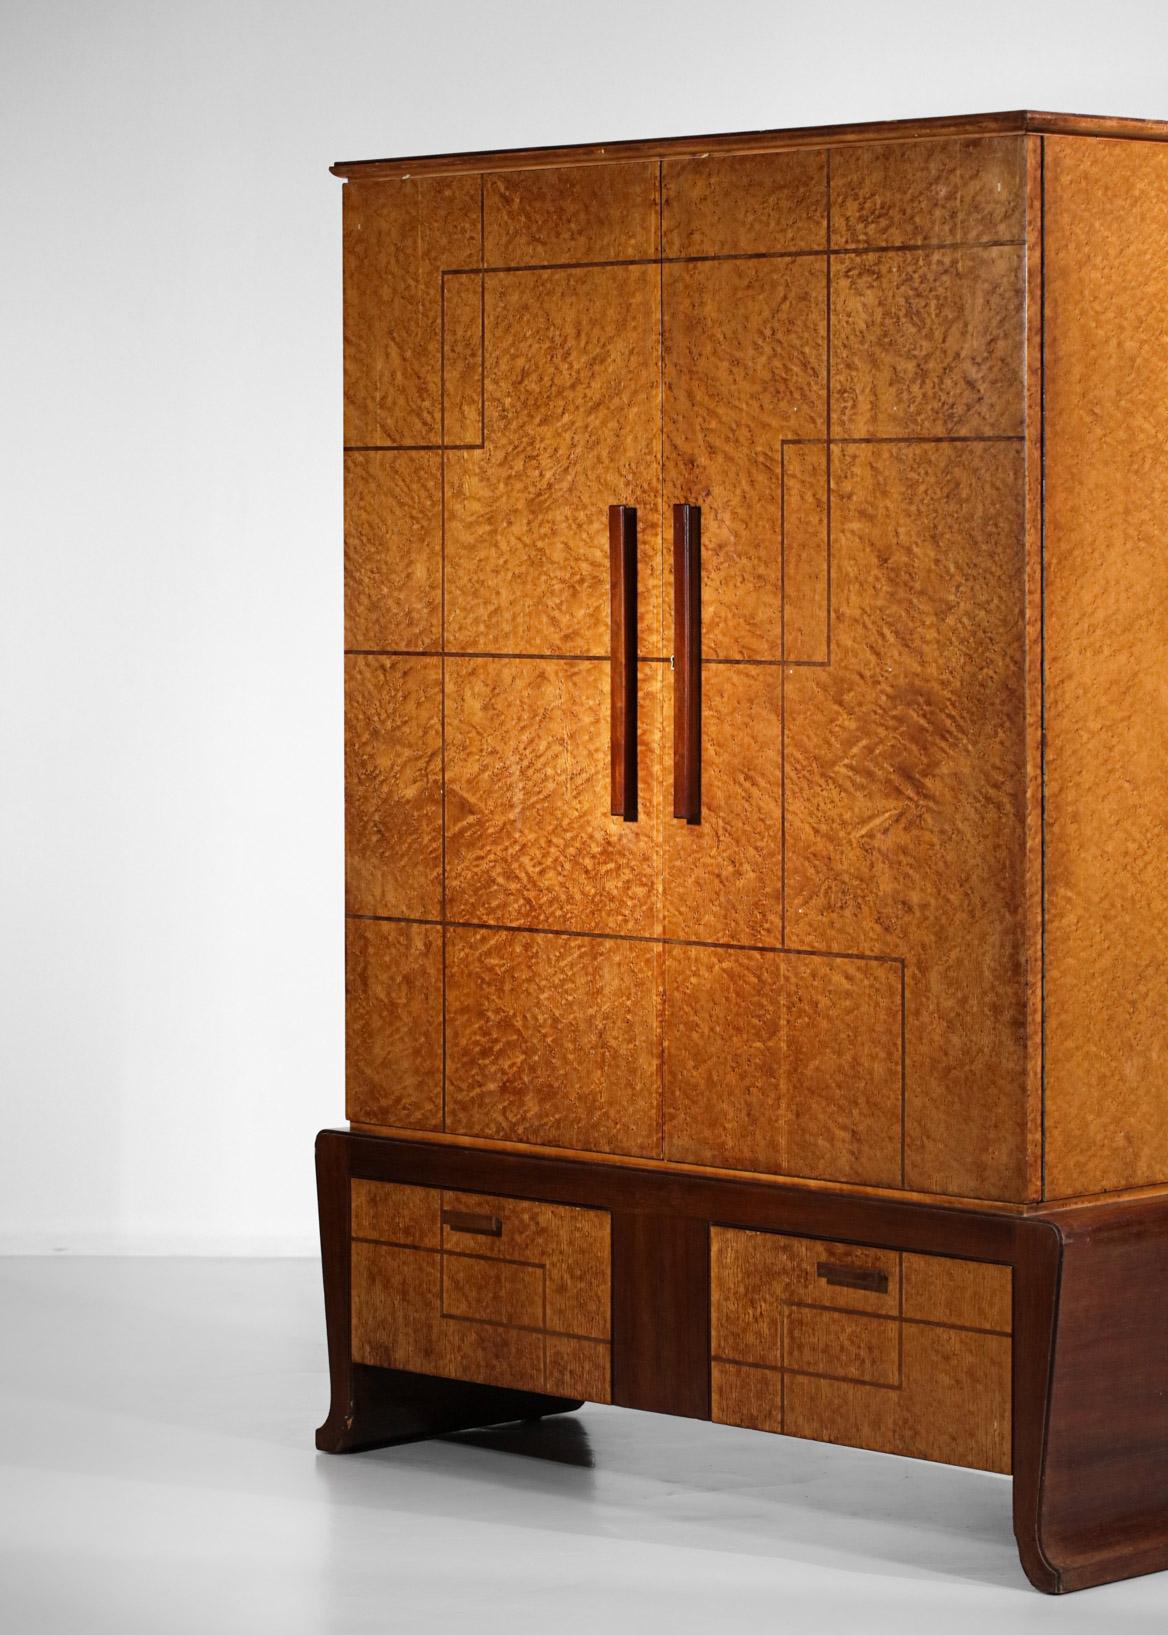 Italian Wardrobe Duo from the 50s/60s in the Style of Gio Ponti - F266 6